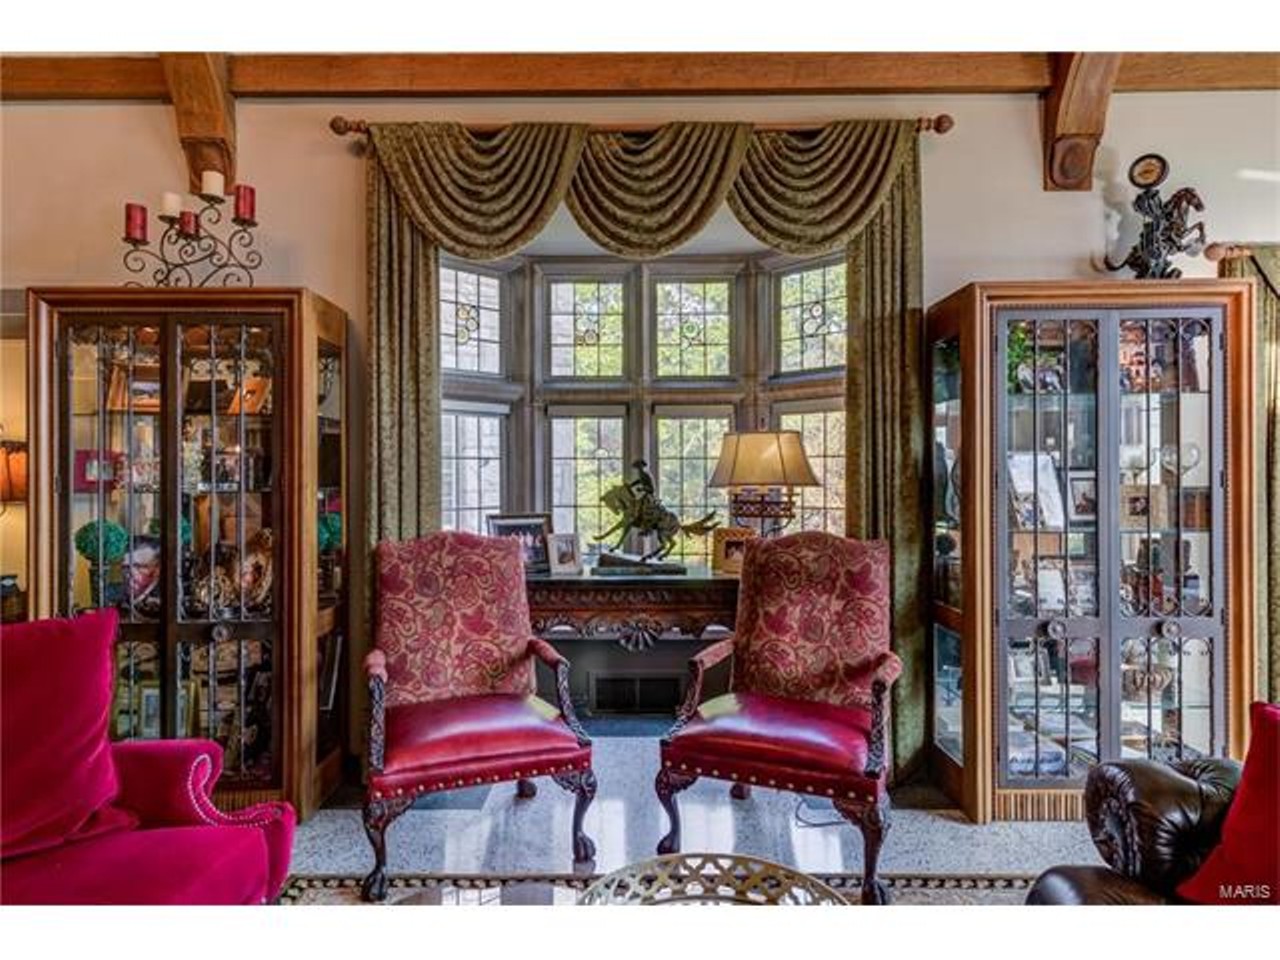 Photographs of "The Castle of Montebello" on Montebello Road in Imperial, Missouri for Dielmann Sotheby's International Realty agent Ted Wight